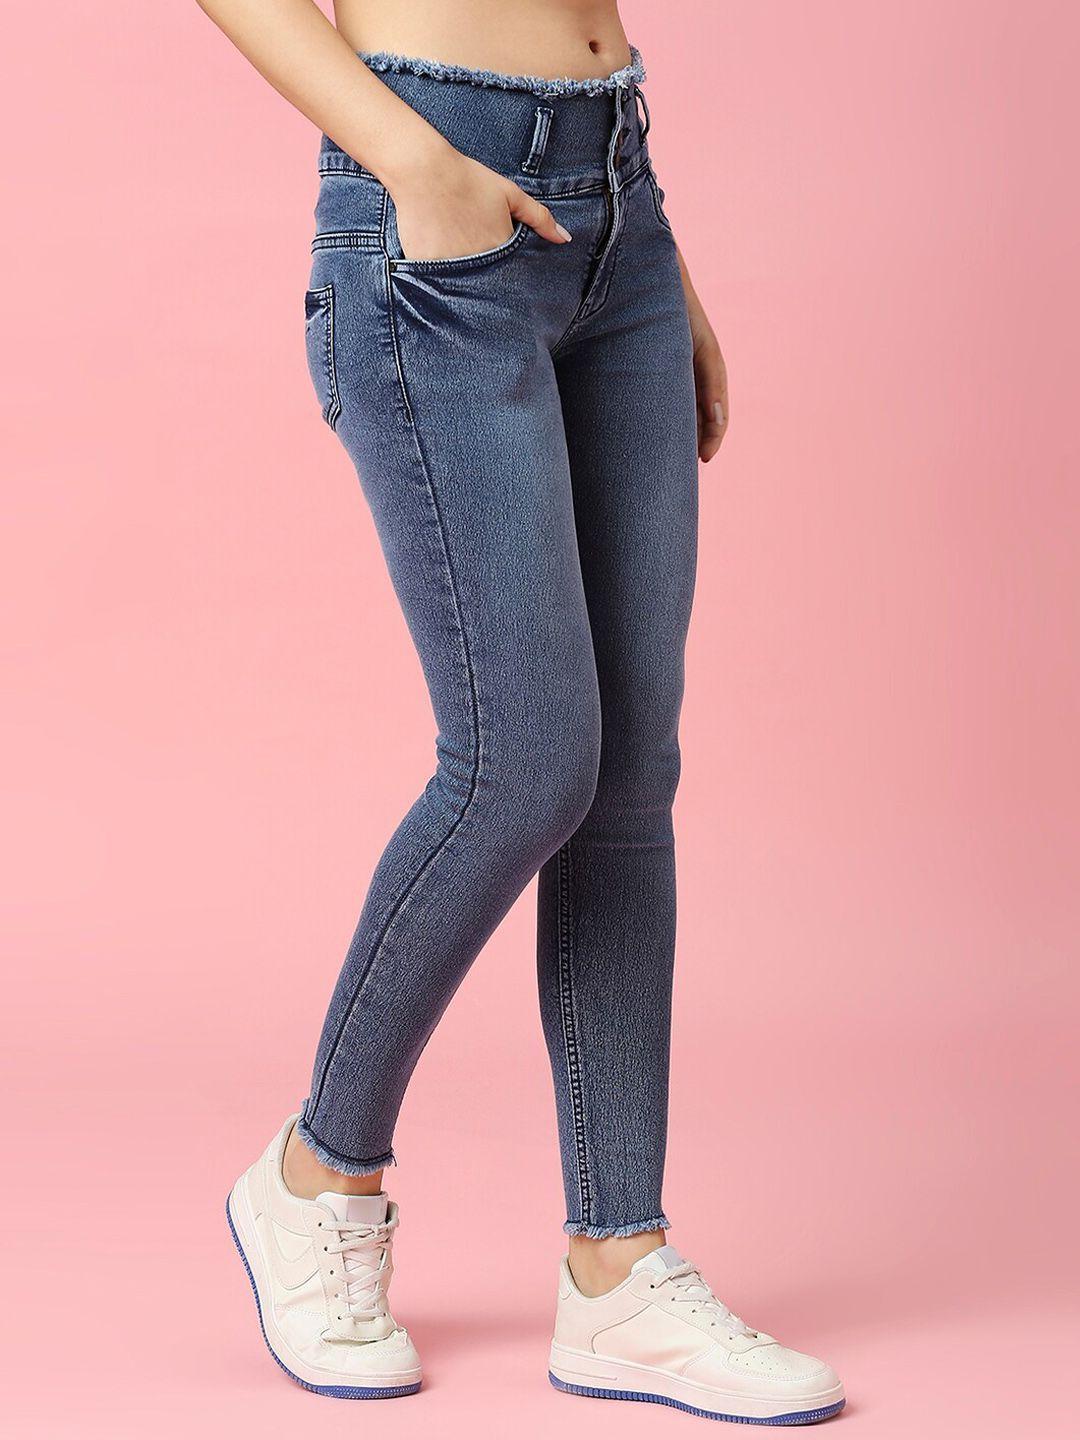 hj-hasasi-women-slim-fit-high-rise-light-fade-stretchable-jeans